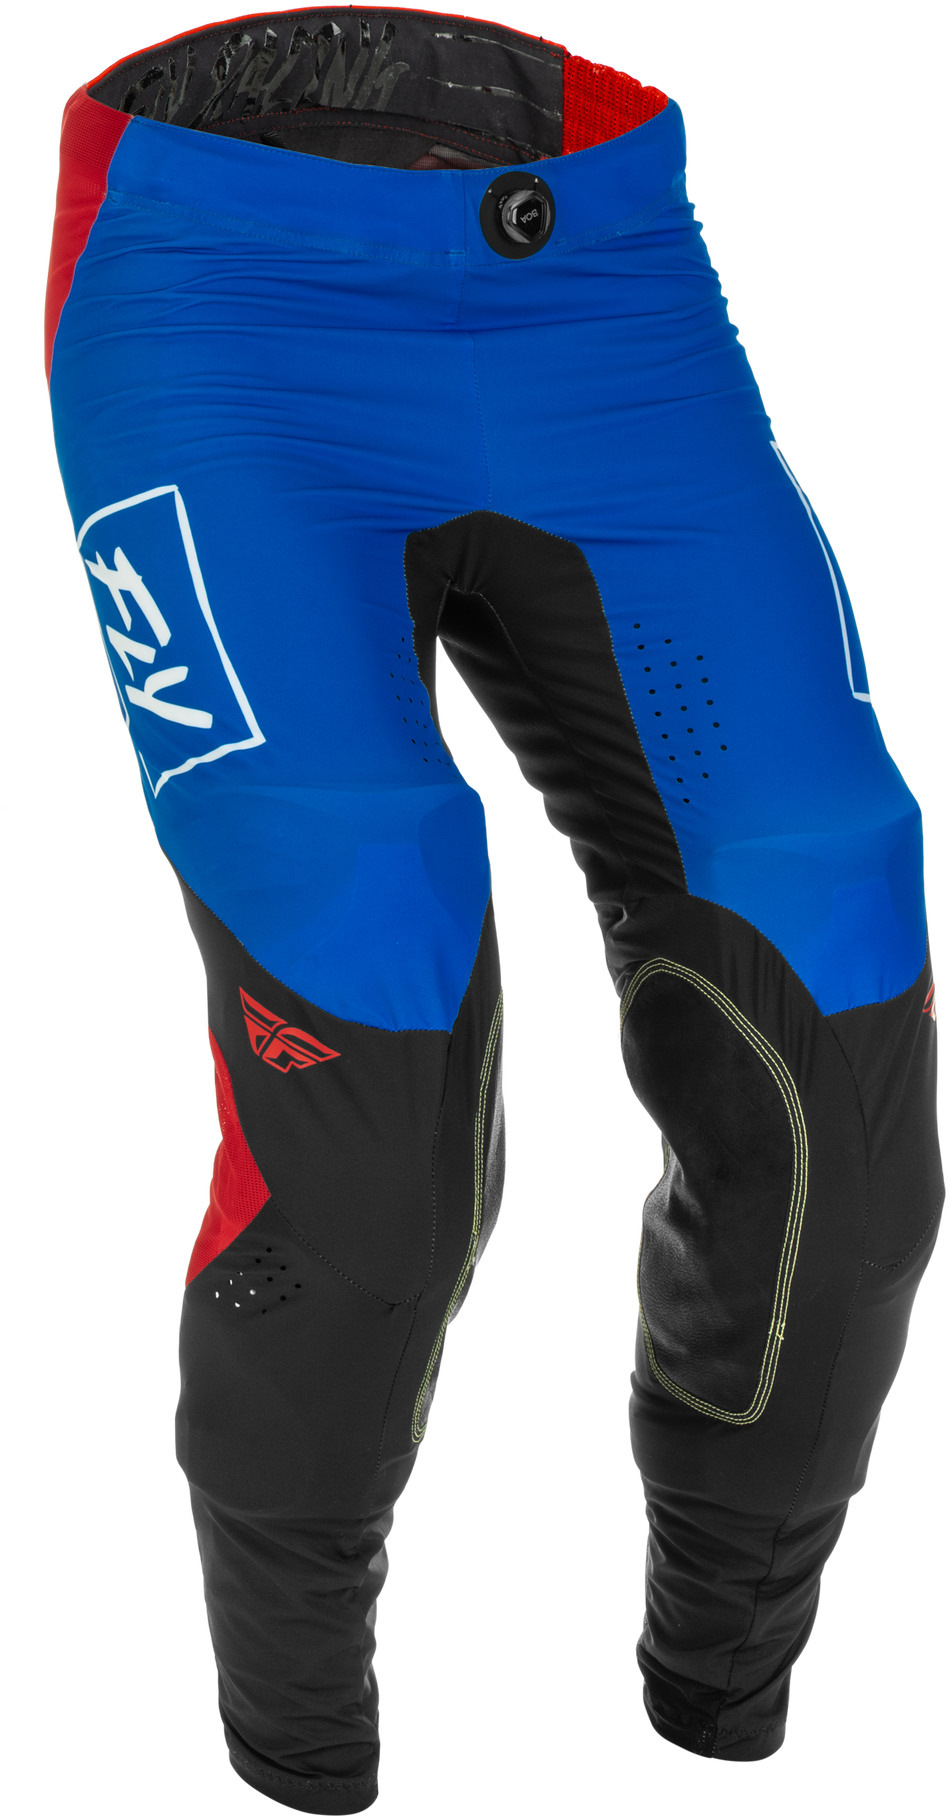 FLY RACING Lite Pants Red/White/Blue Size 32 375-73332